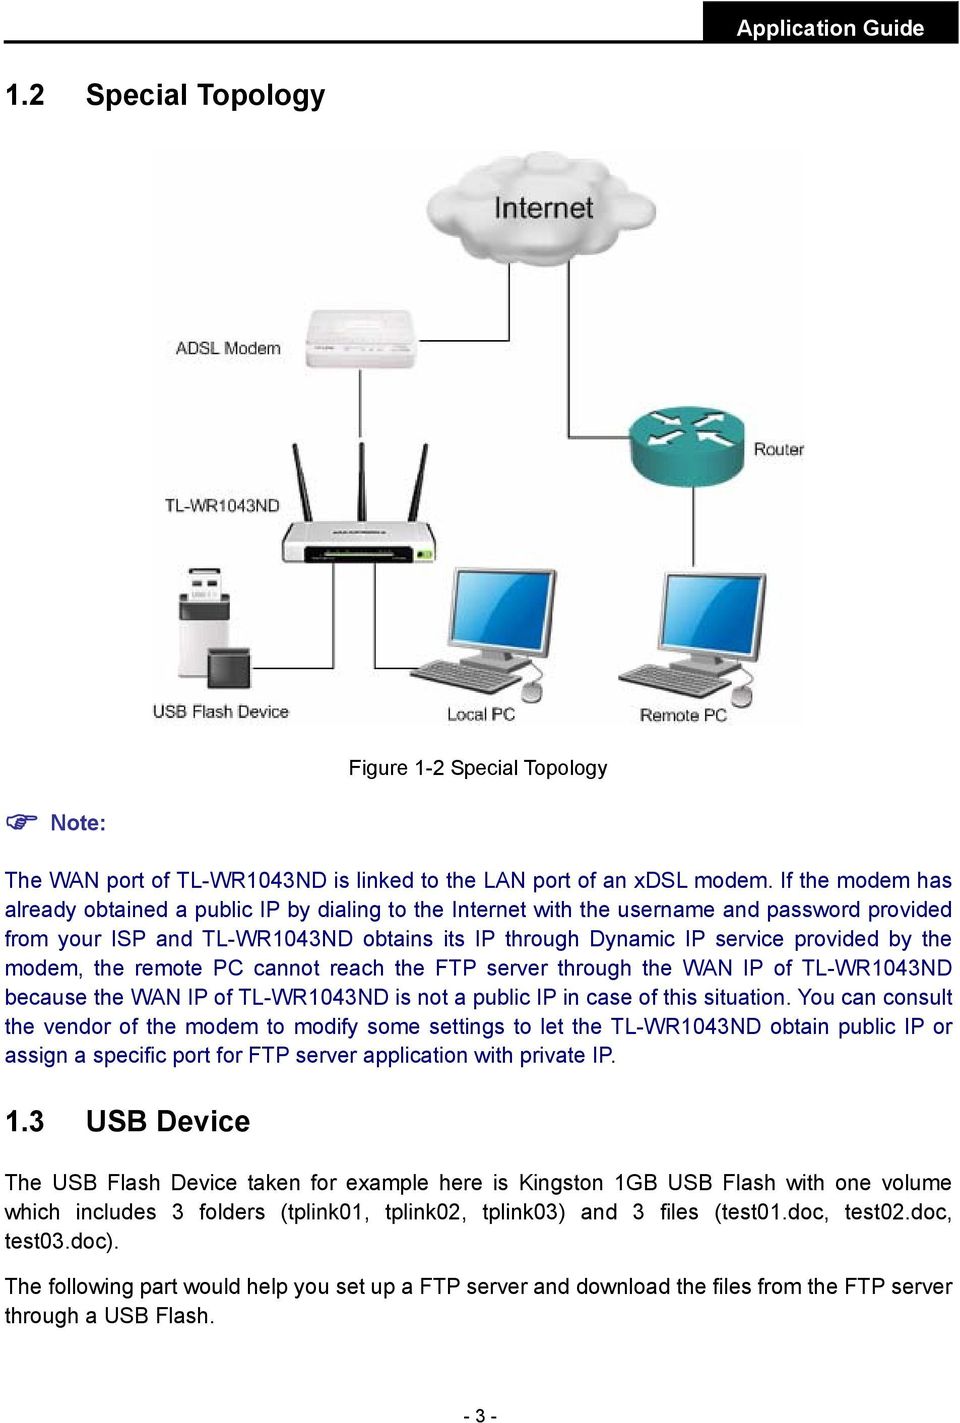 the modem, the remote PC cannot reach the FTP server through the WAN IP of TL-WR1043ND because the WAN IP of TL-WR1043ND is not a public IP in case of this situation.